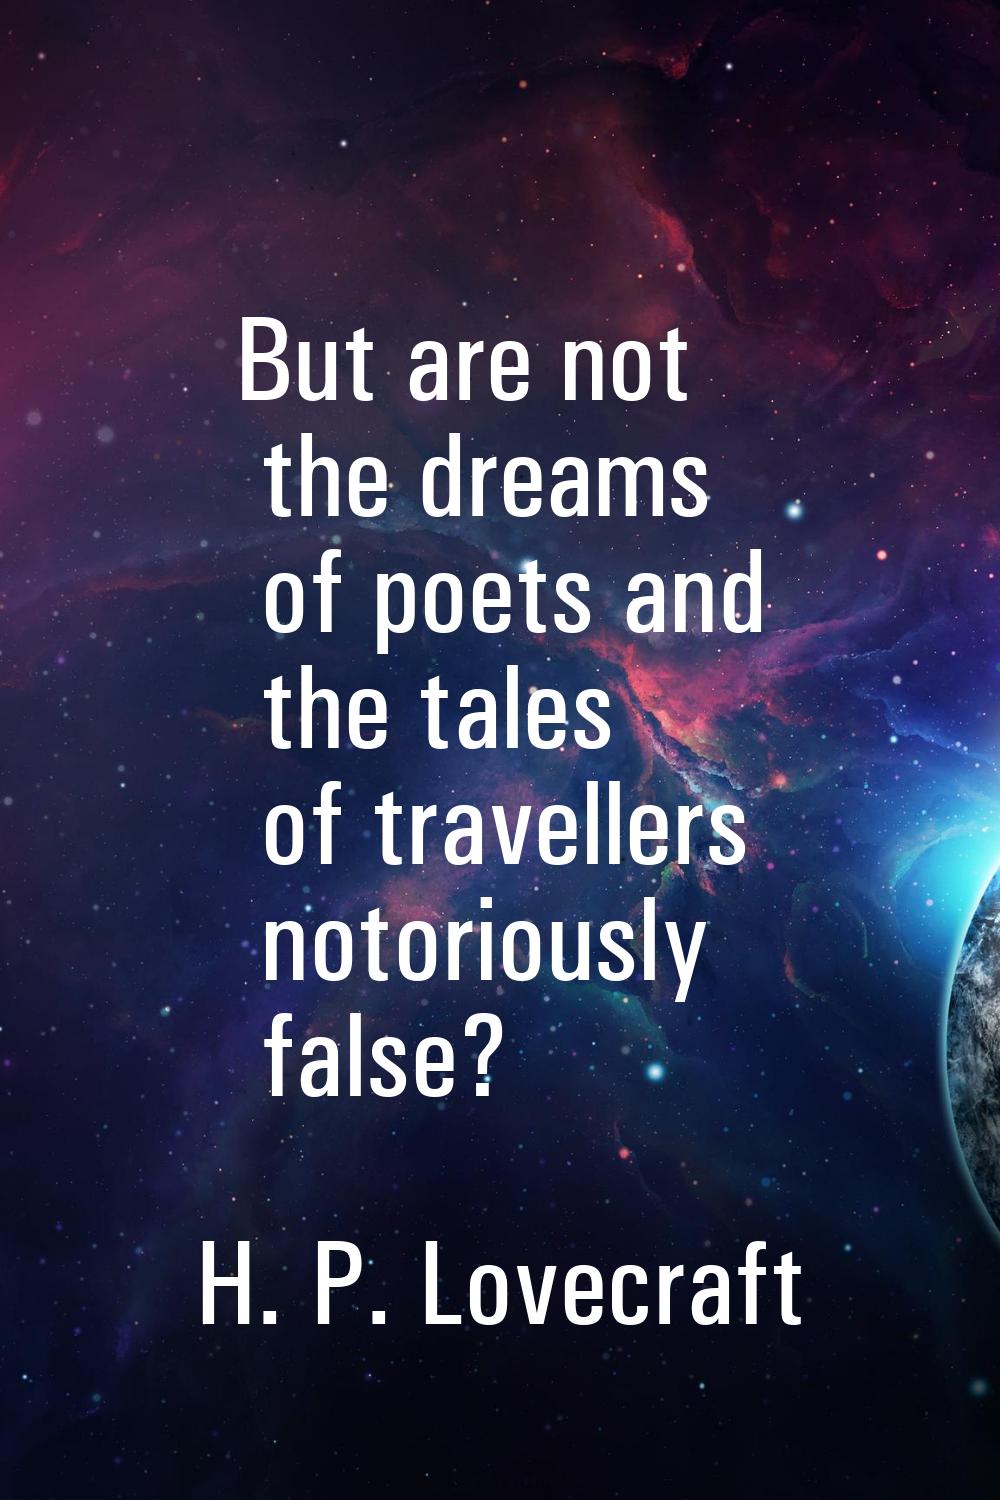 But are not the dreams of poets and the tales of travellers notoriously false?